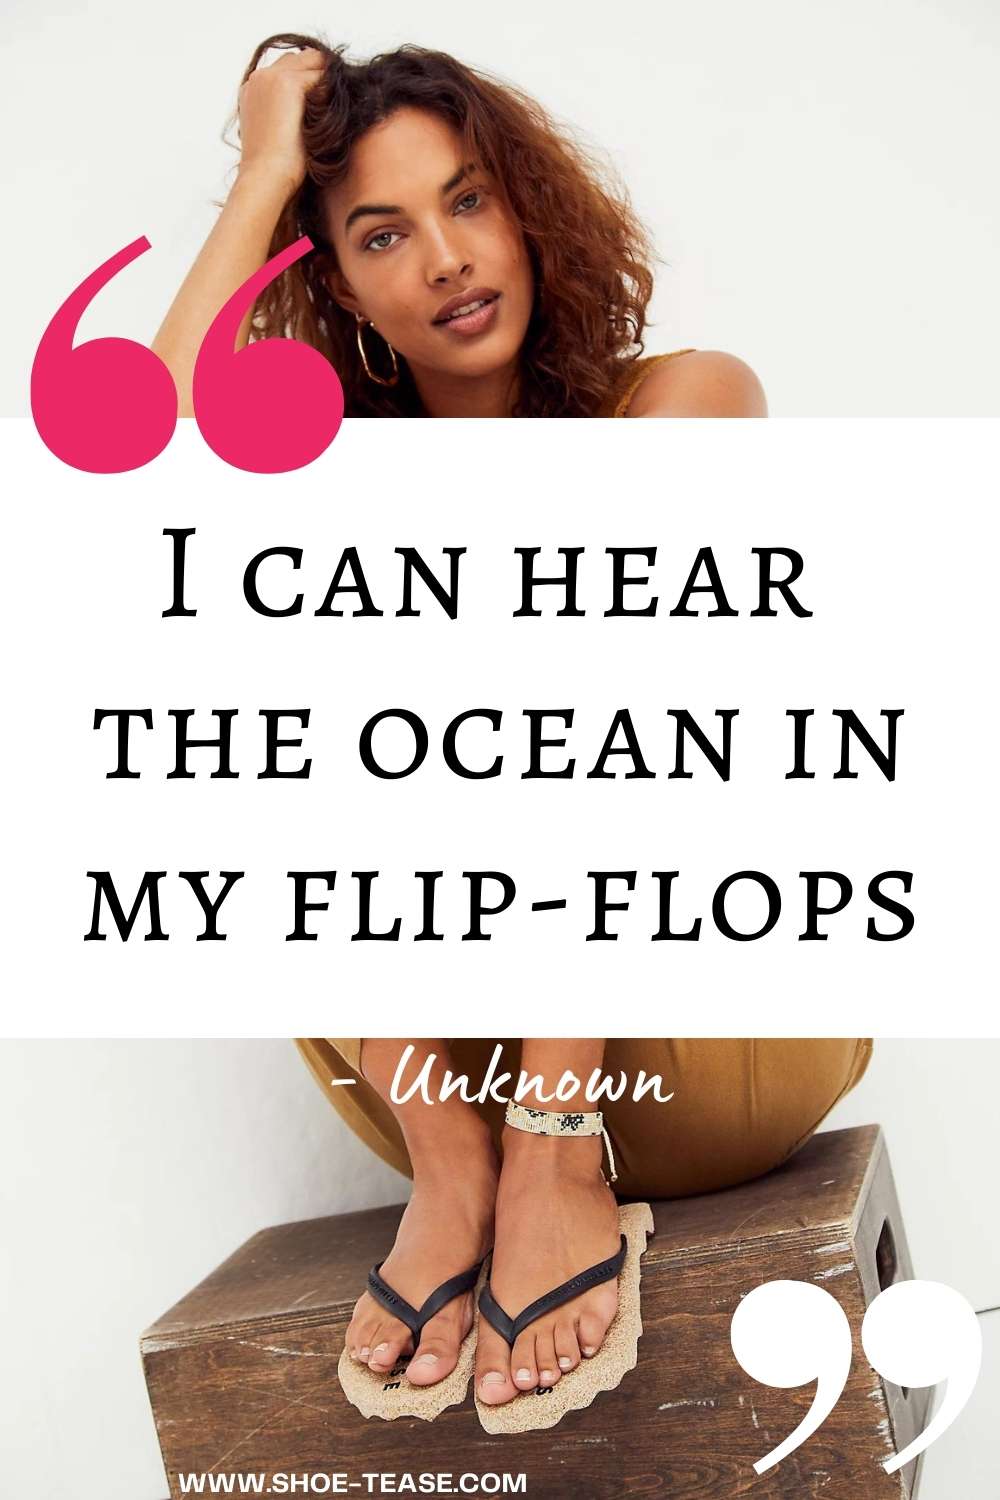 Flip flop quote reading I can hear the ocean in my flip flops over image of woman sitting on stool in flip flops.